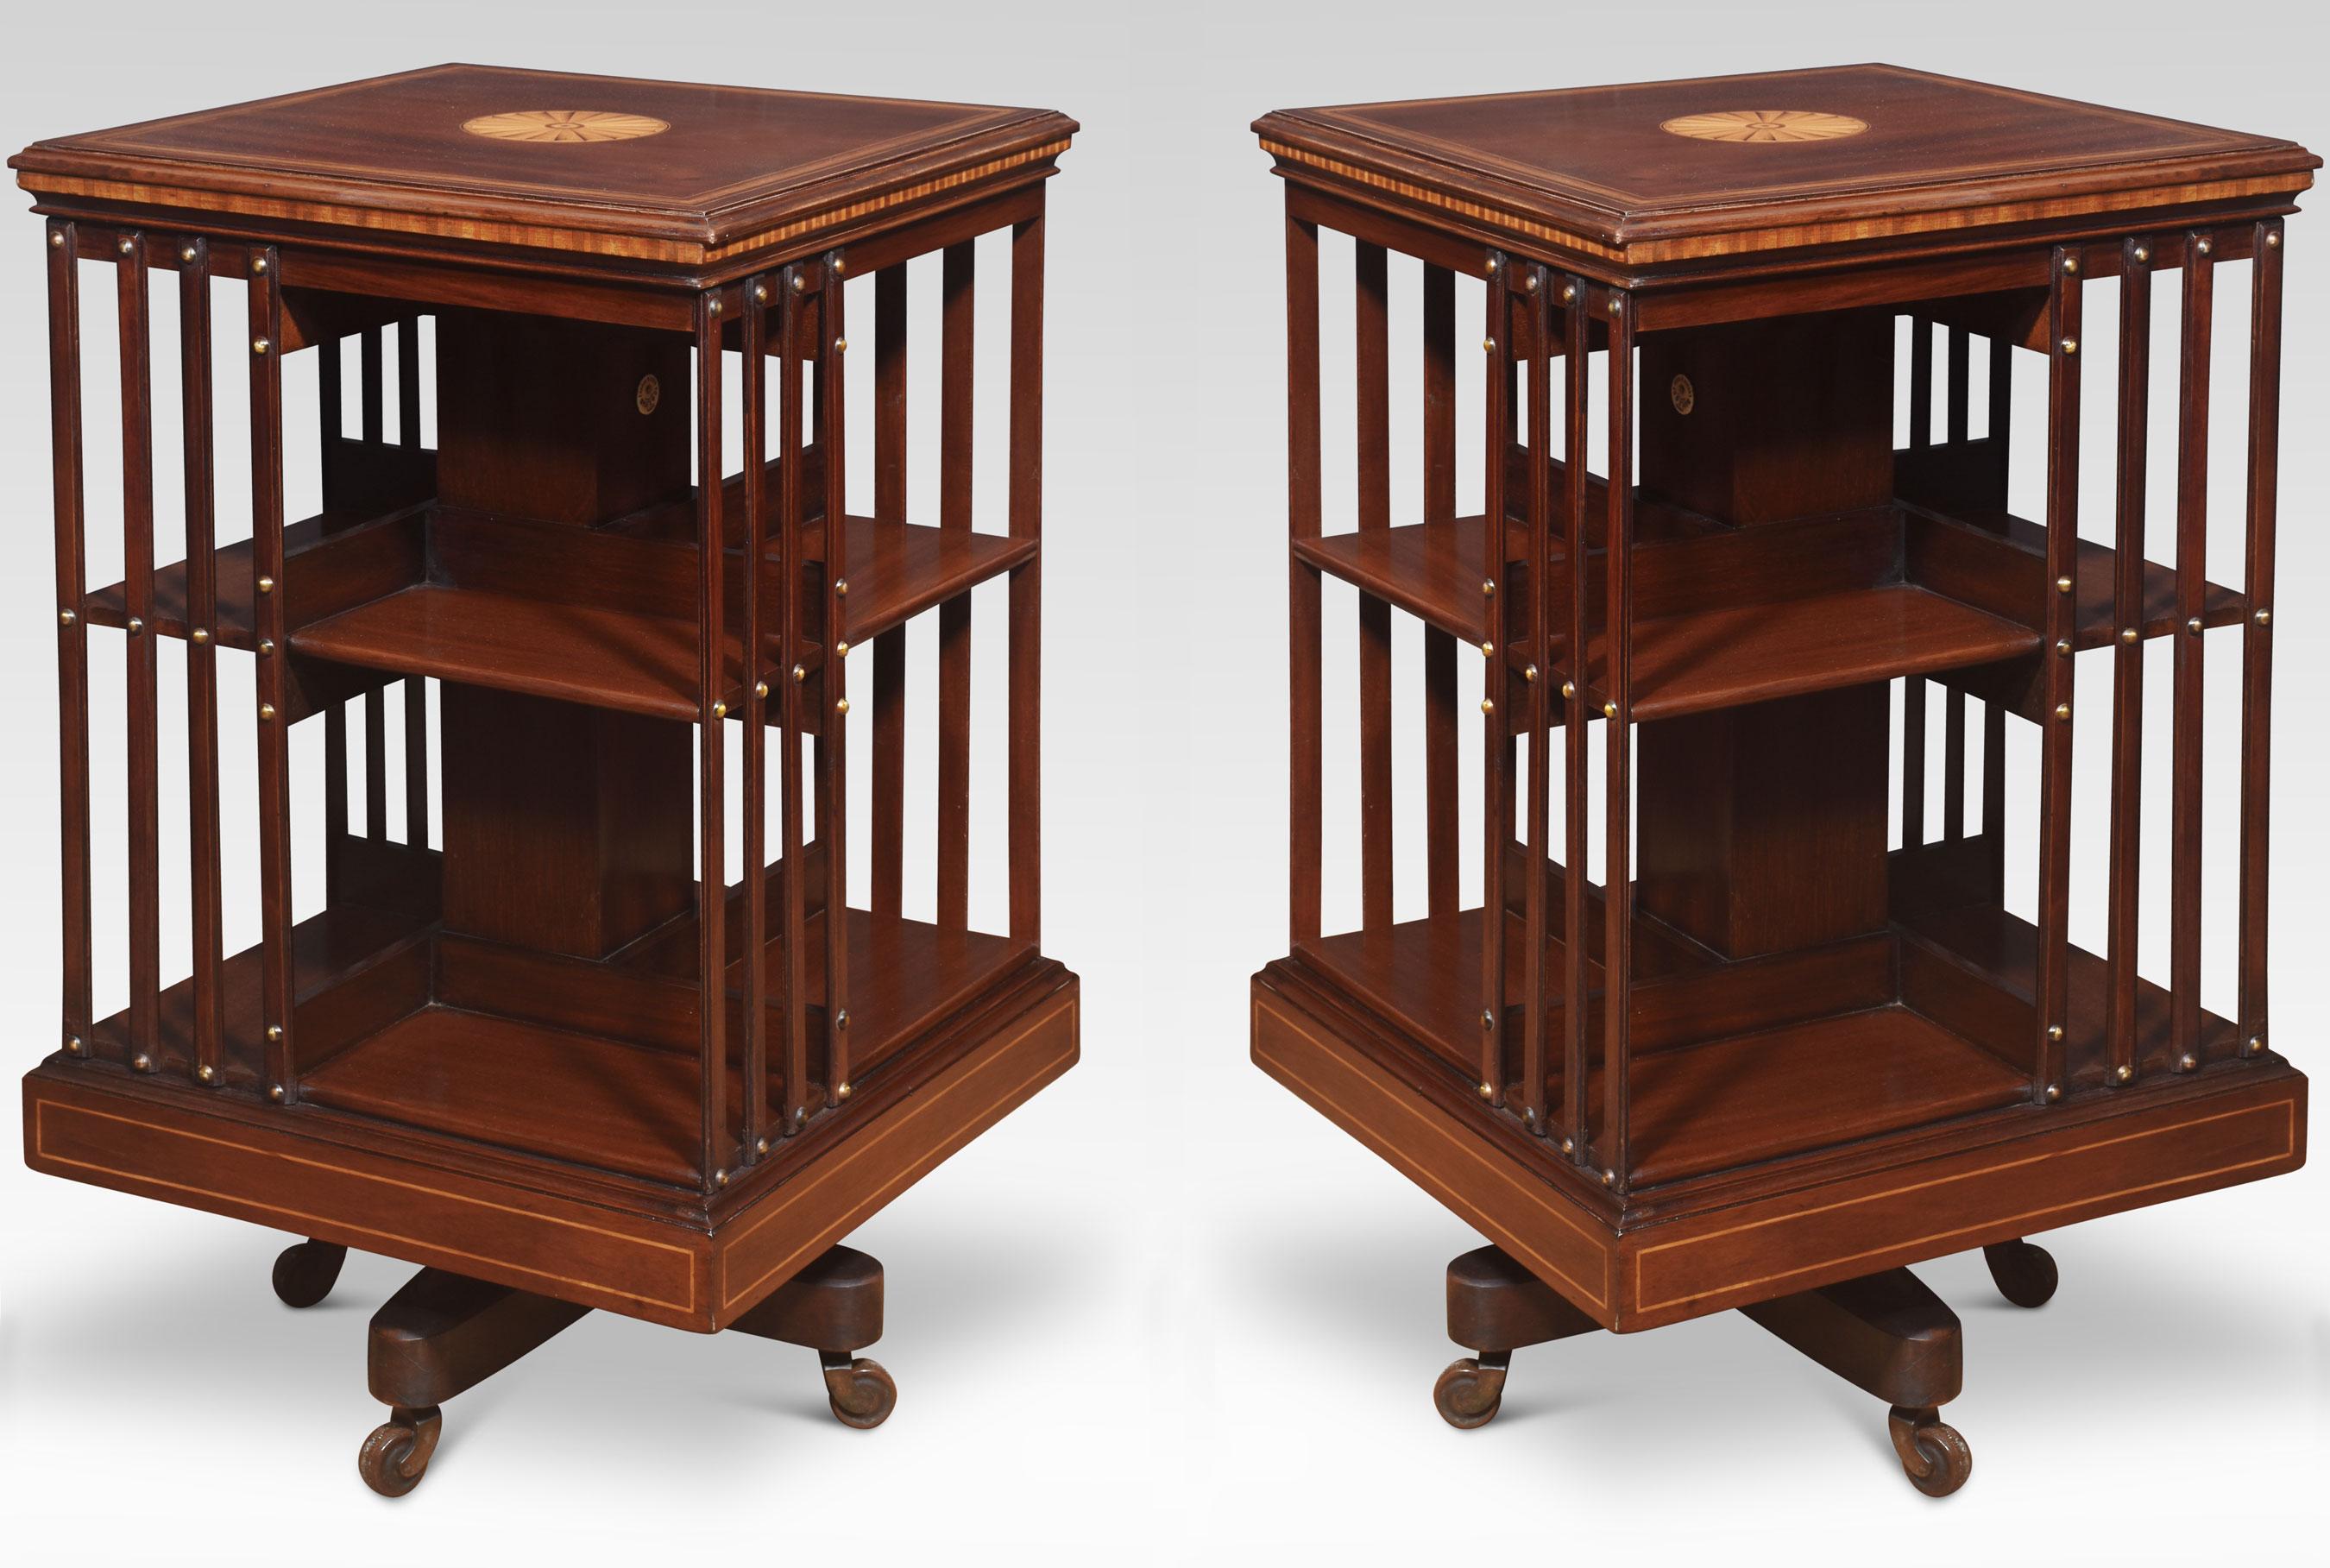 Pair of mahogany inlaid revolving bookcases by Maple and Co In Good Condition For Sale In Cheshire, GB